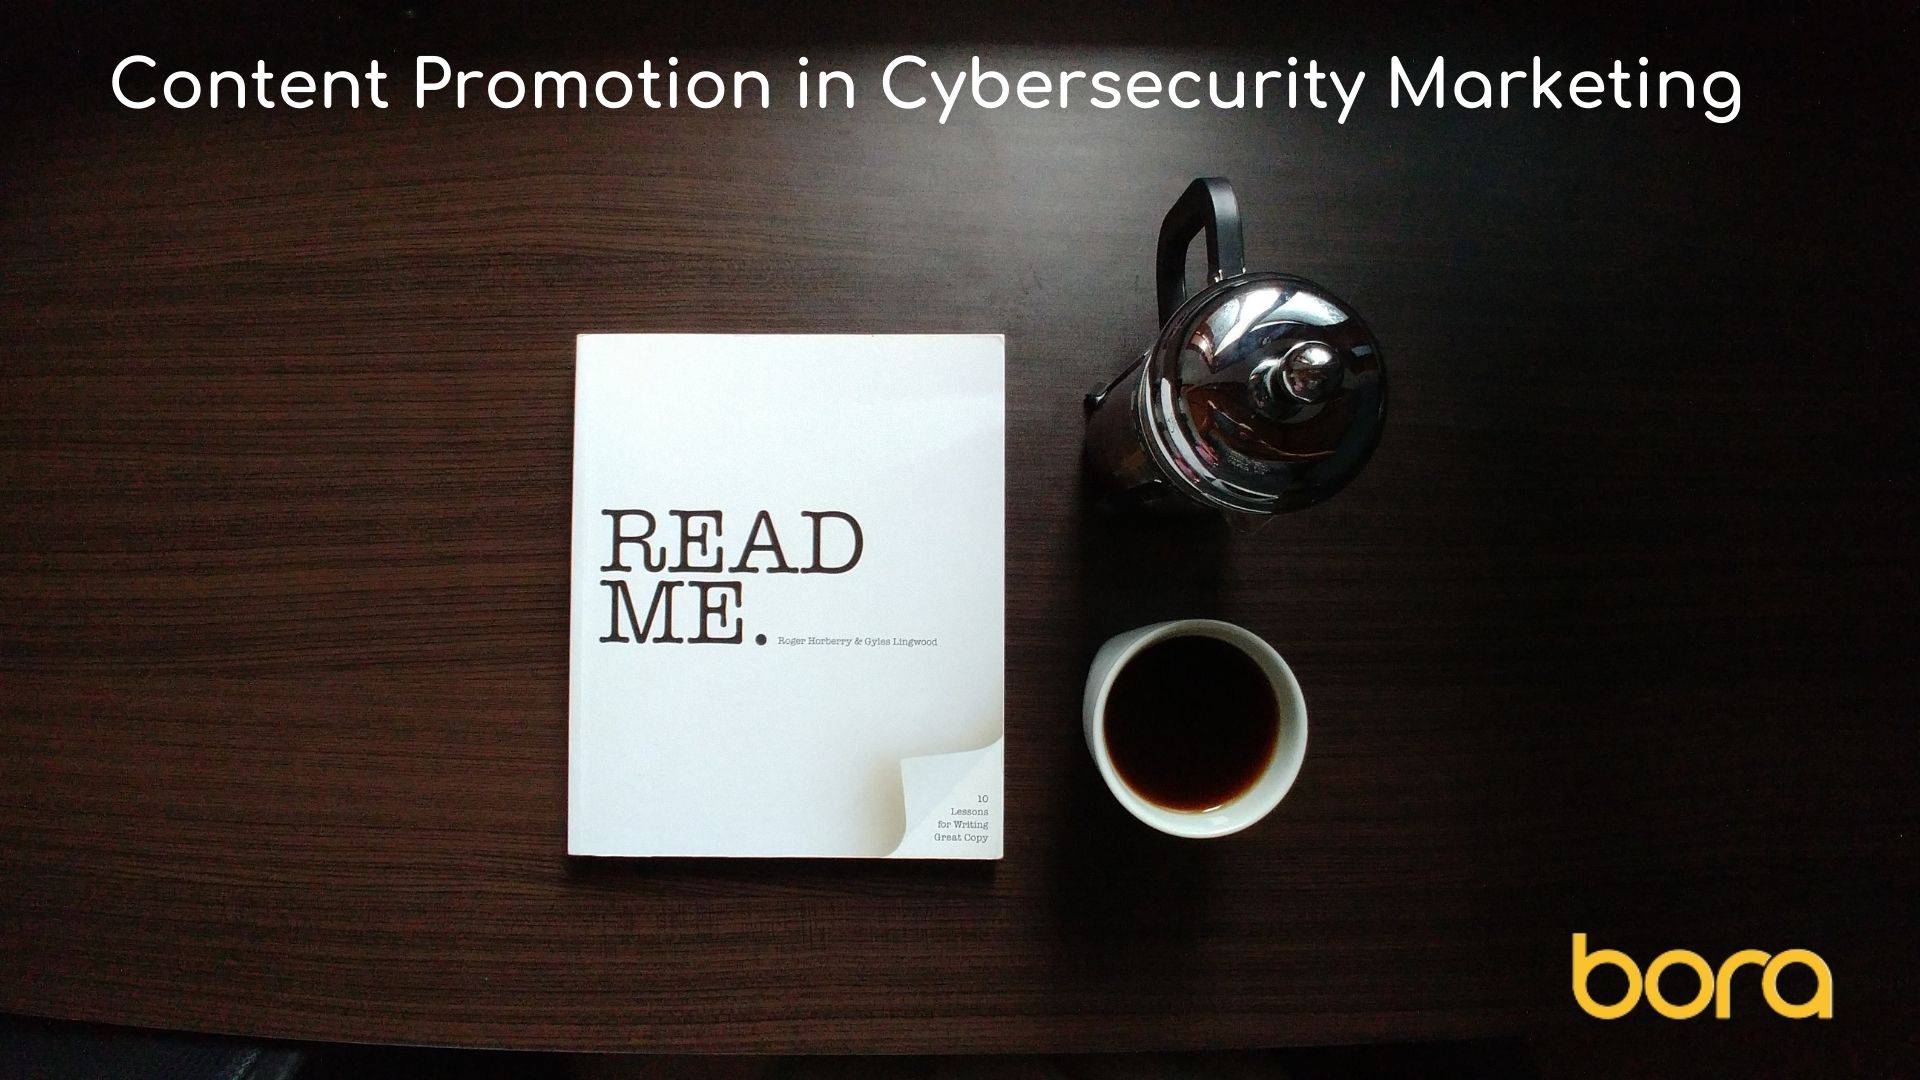 Content Promotion in Cybersecurity Marketing